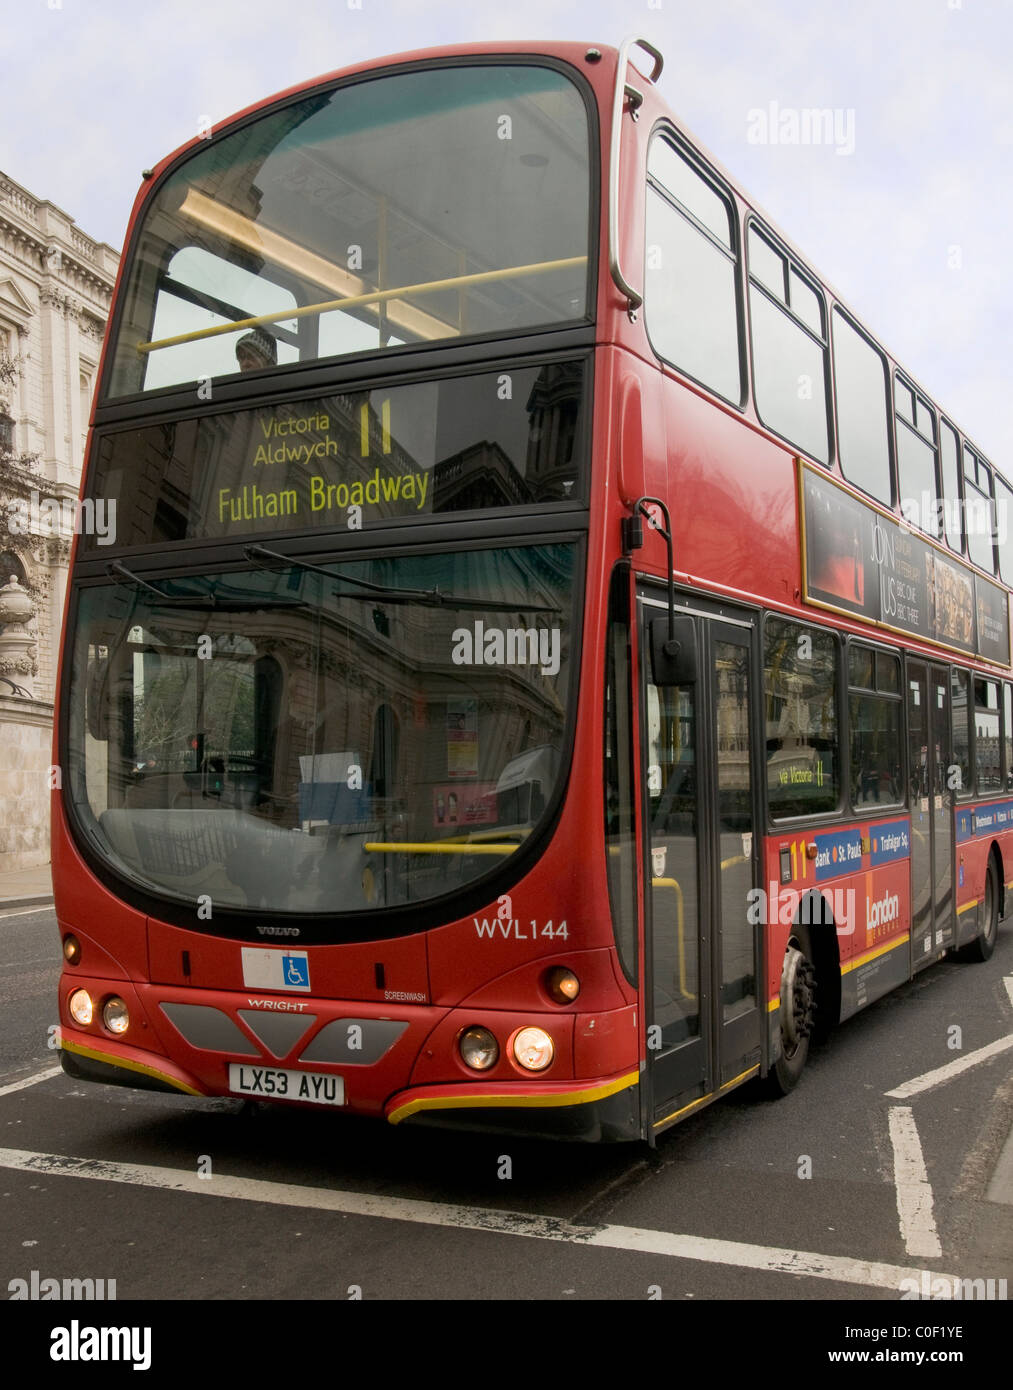 Red double-decker London bus Stock Photo